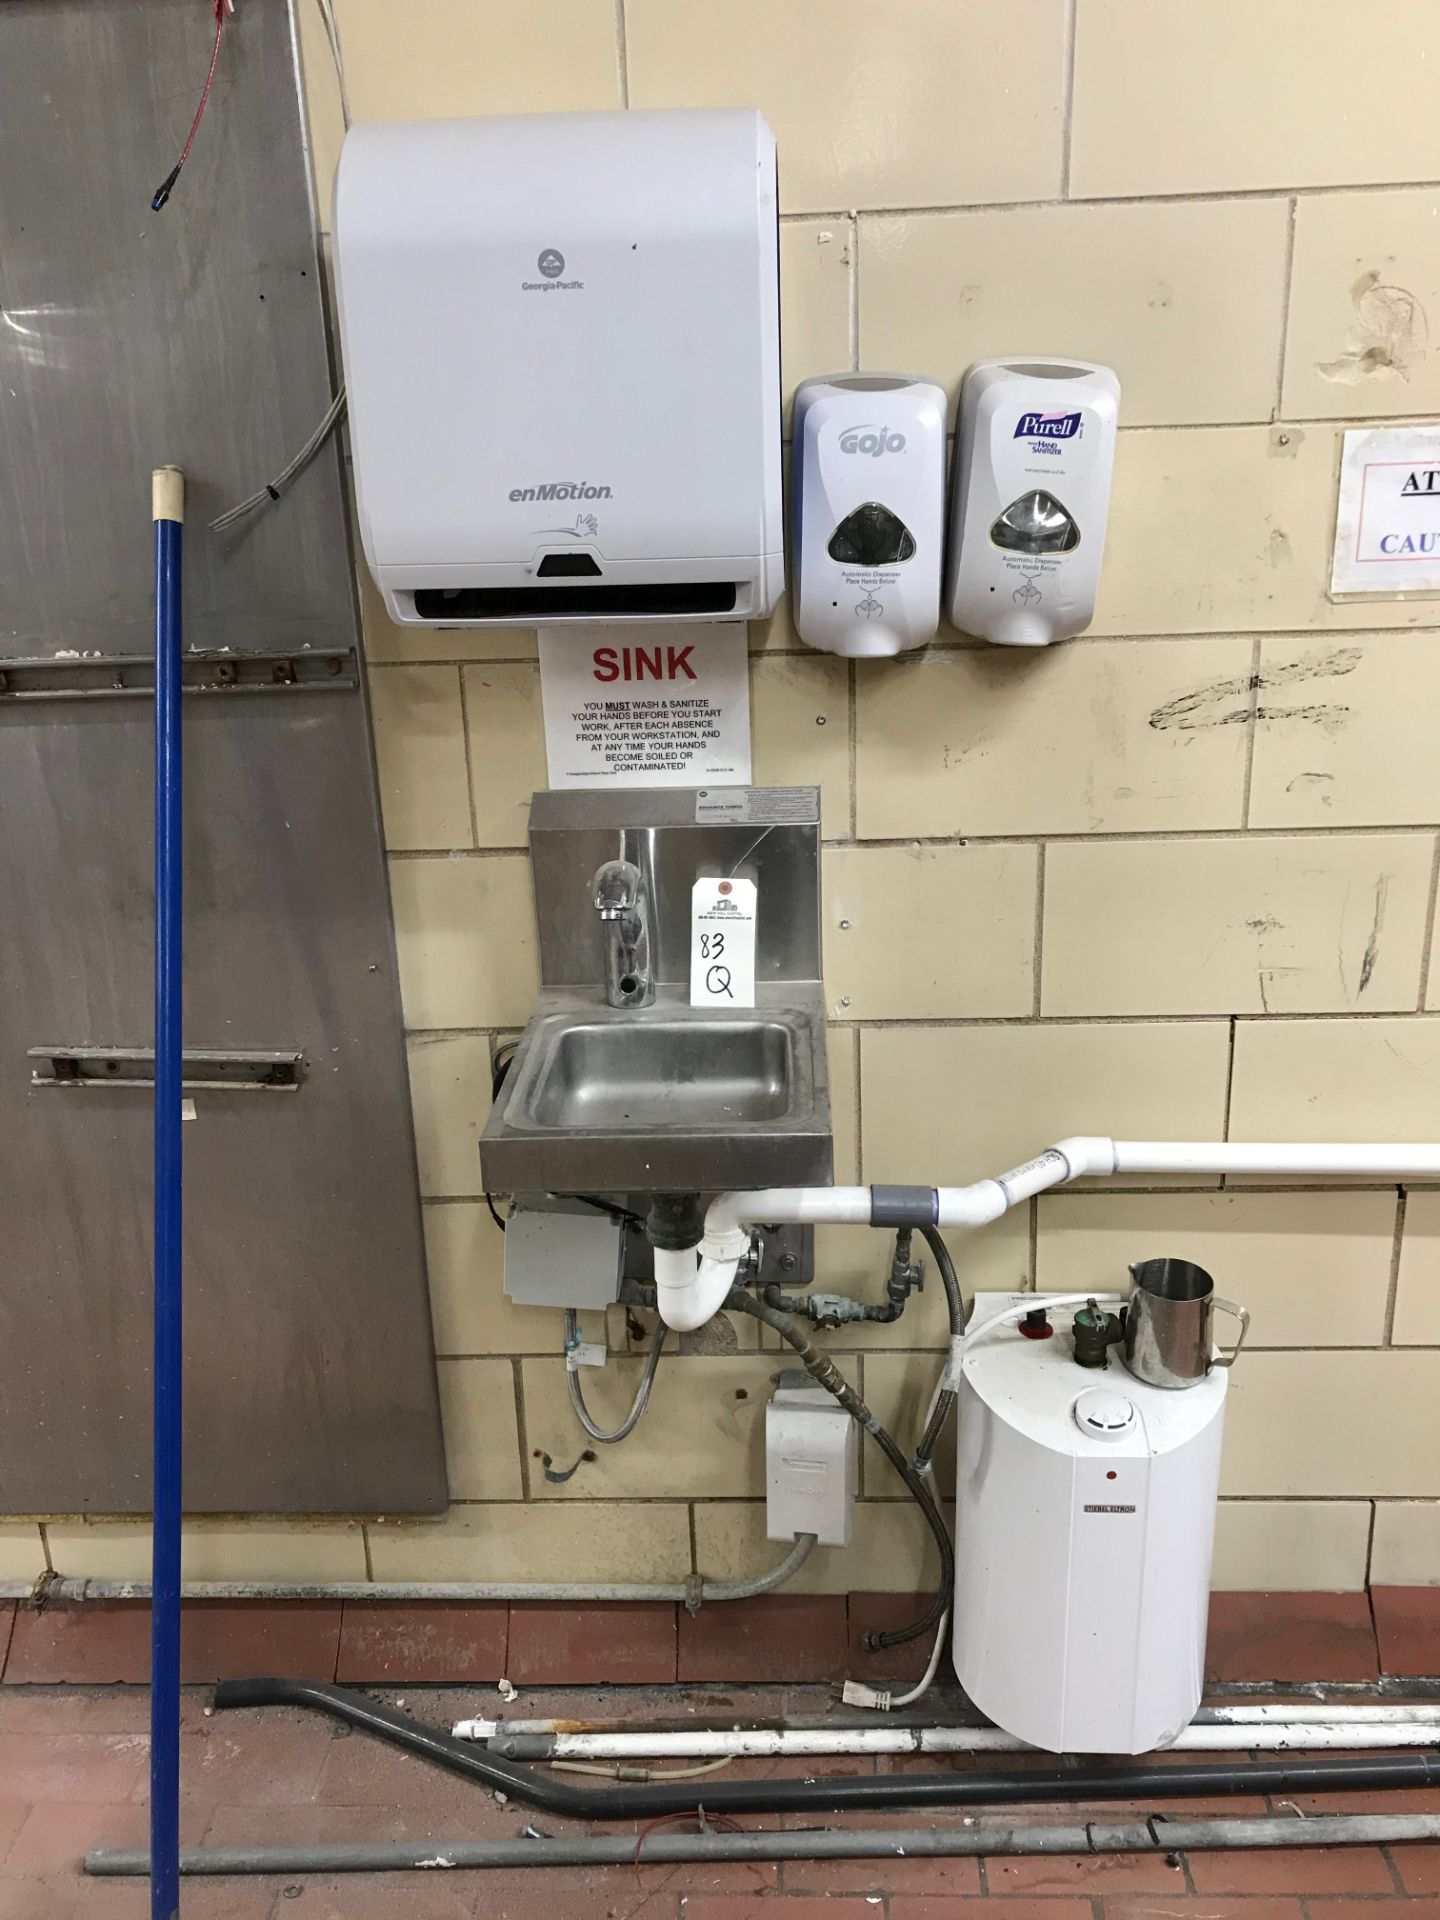 STAINLESS STEEL SINK WITH HOT WATER HEATER, PAPER TOWEL DISPENSER | Rig Fee: $25